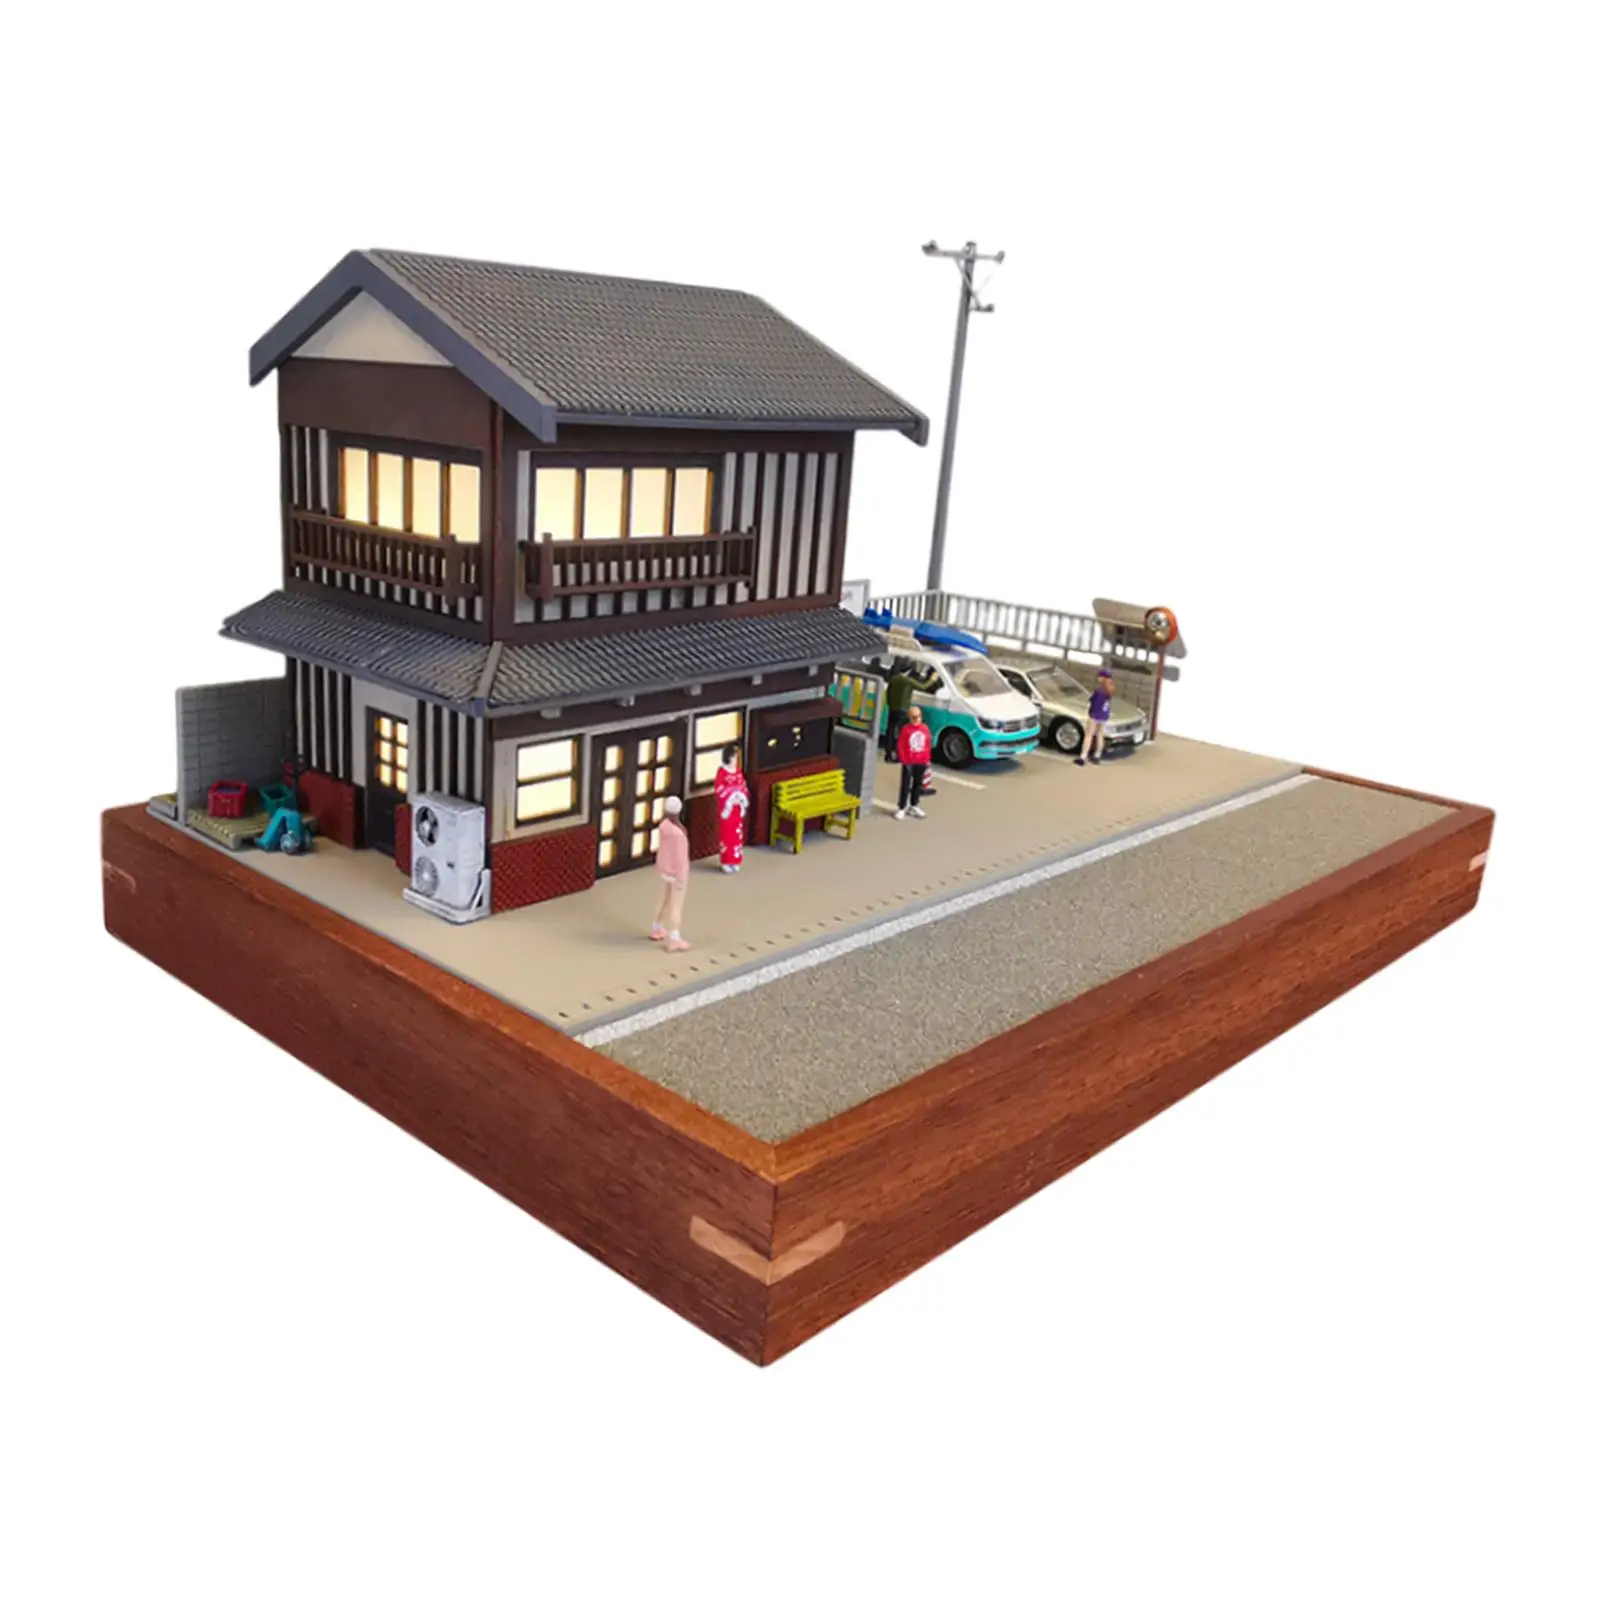 Building Display Scene Model Crafts 1/64 Building Model House for Micro Landscapes Decor DIY Scene Layout DIY Projects Accessory